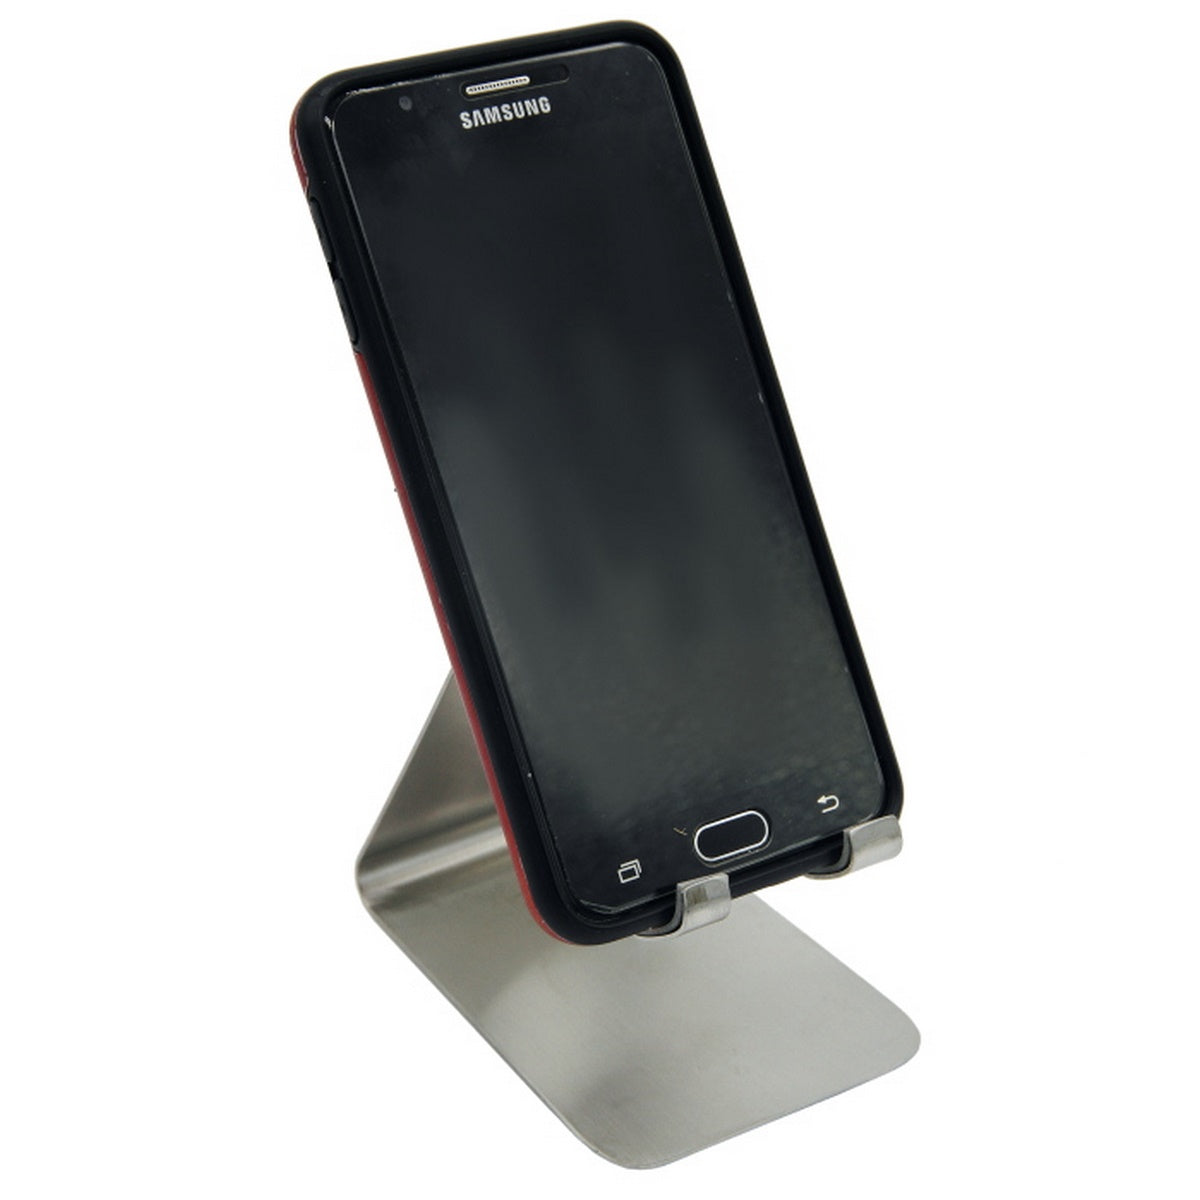 Silver Metal Mirror Finish Universal Mobile Phone Holder Stand - For Personal, Corporate Gifting, Return Gift, Event Gifting, Promotional Freebies JATTMS00